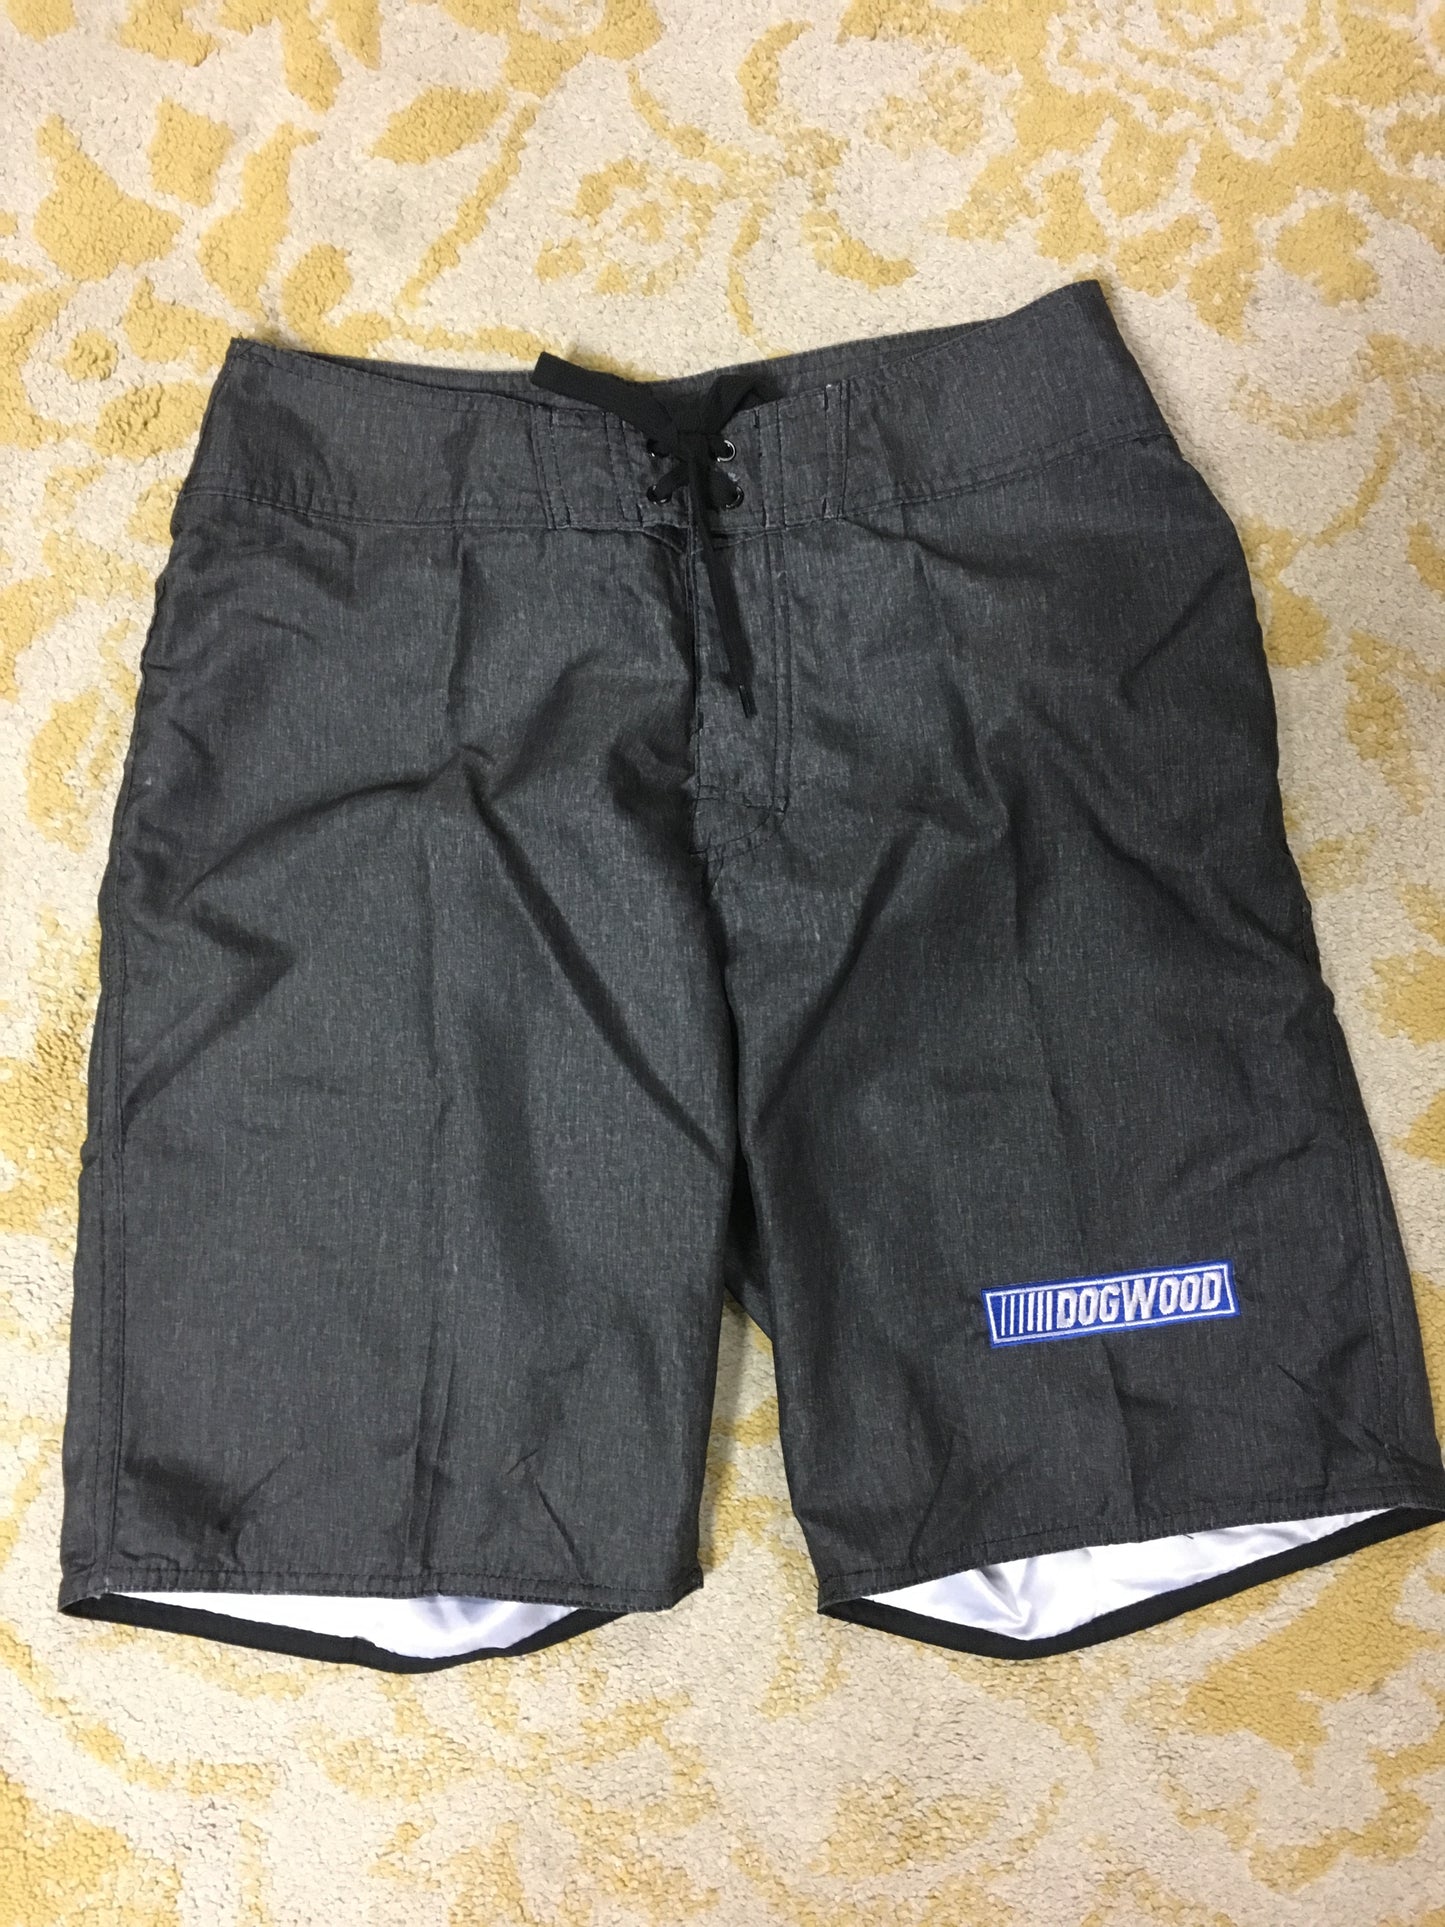 Speed Wave Shorts (size & color options listed)